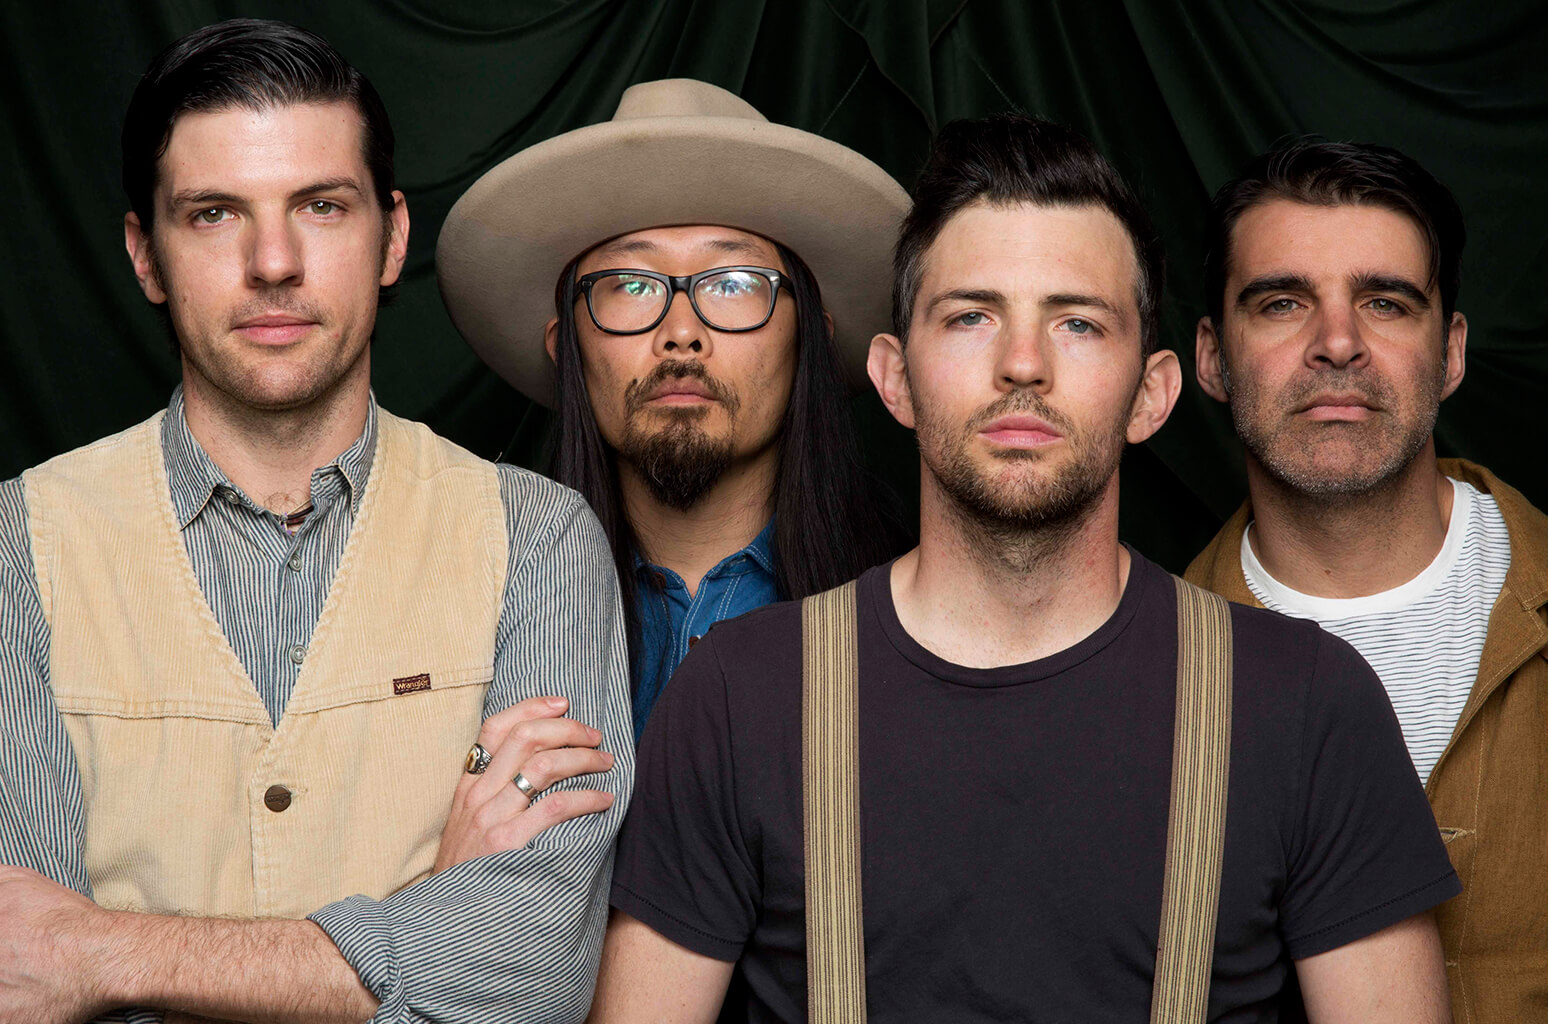 PREVIEW: Avett Brothers at Union Bank & Trust Pavilion